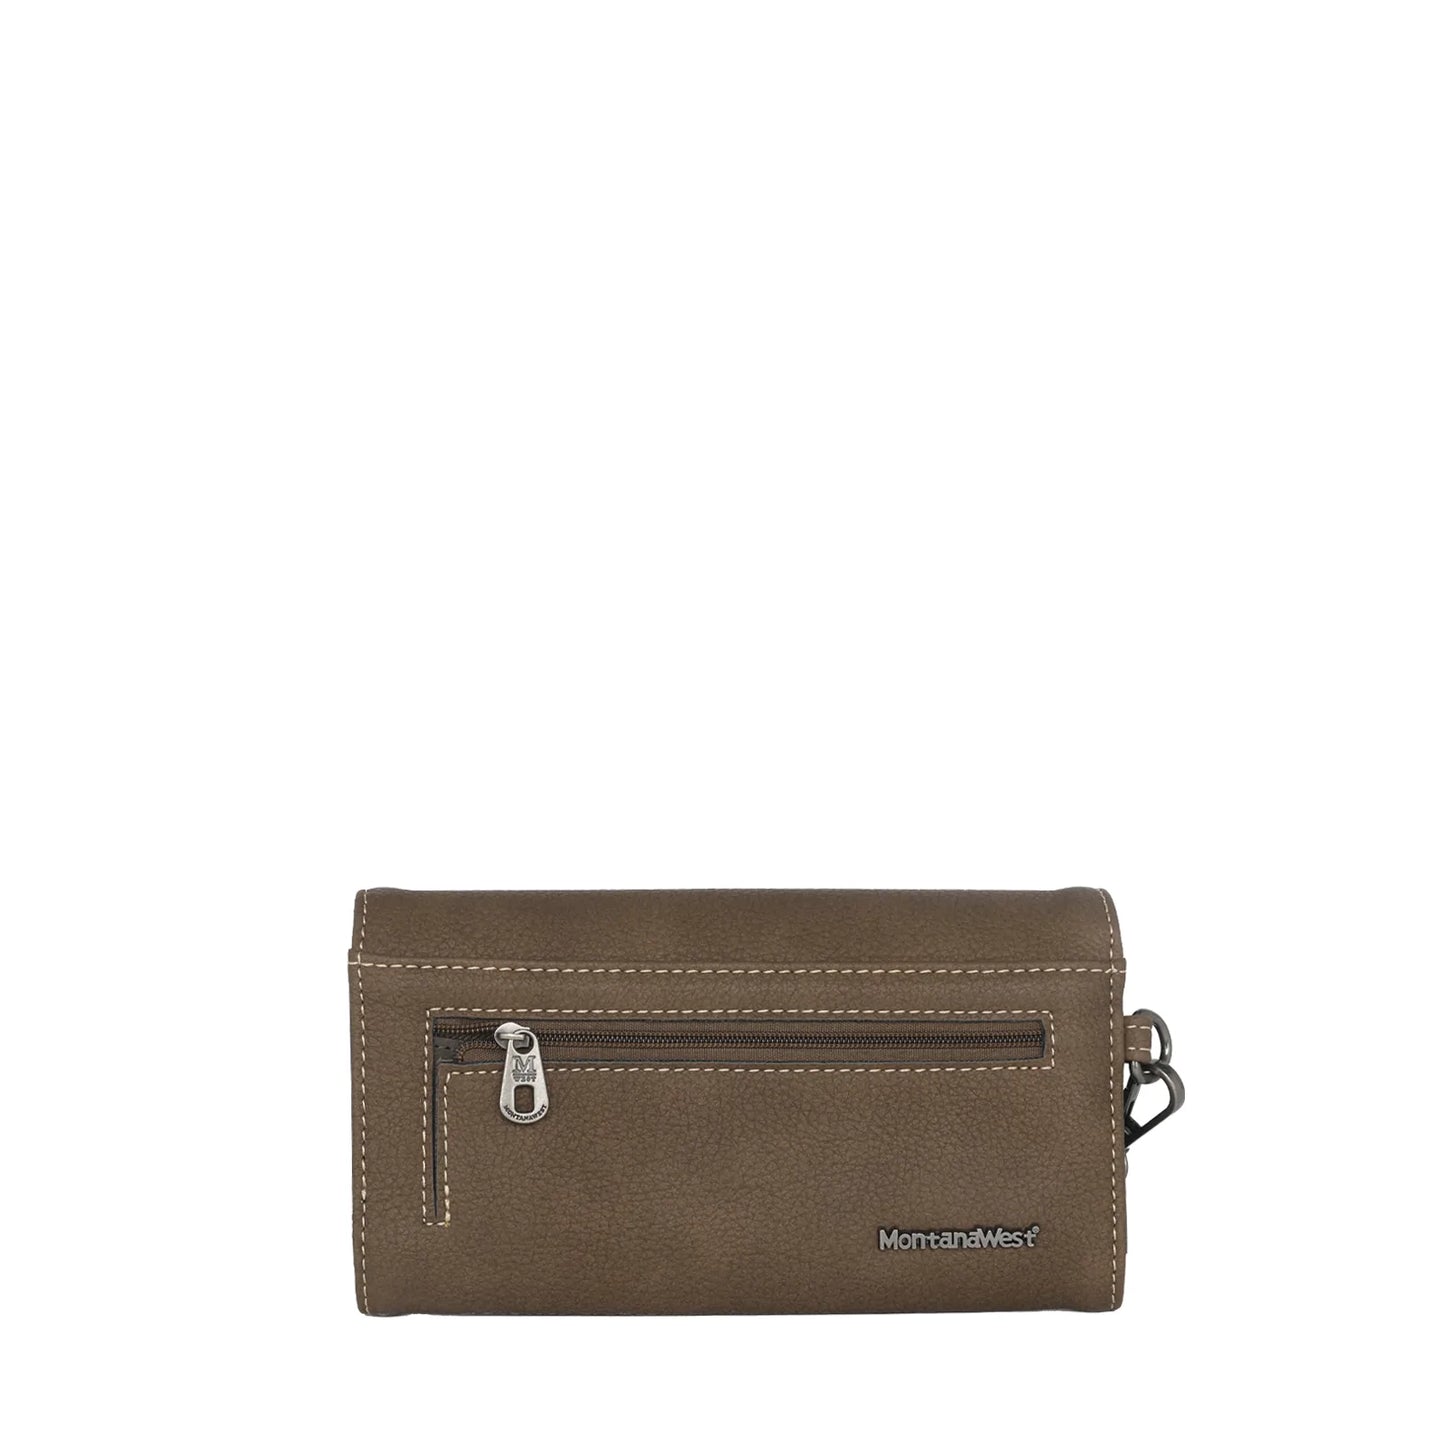 MW1113W002 - Montana West Concho Collection Wallet